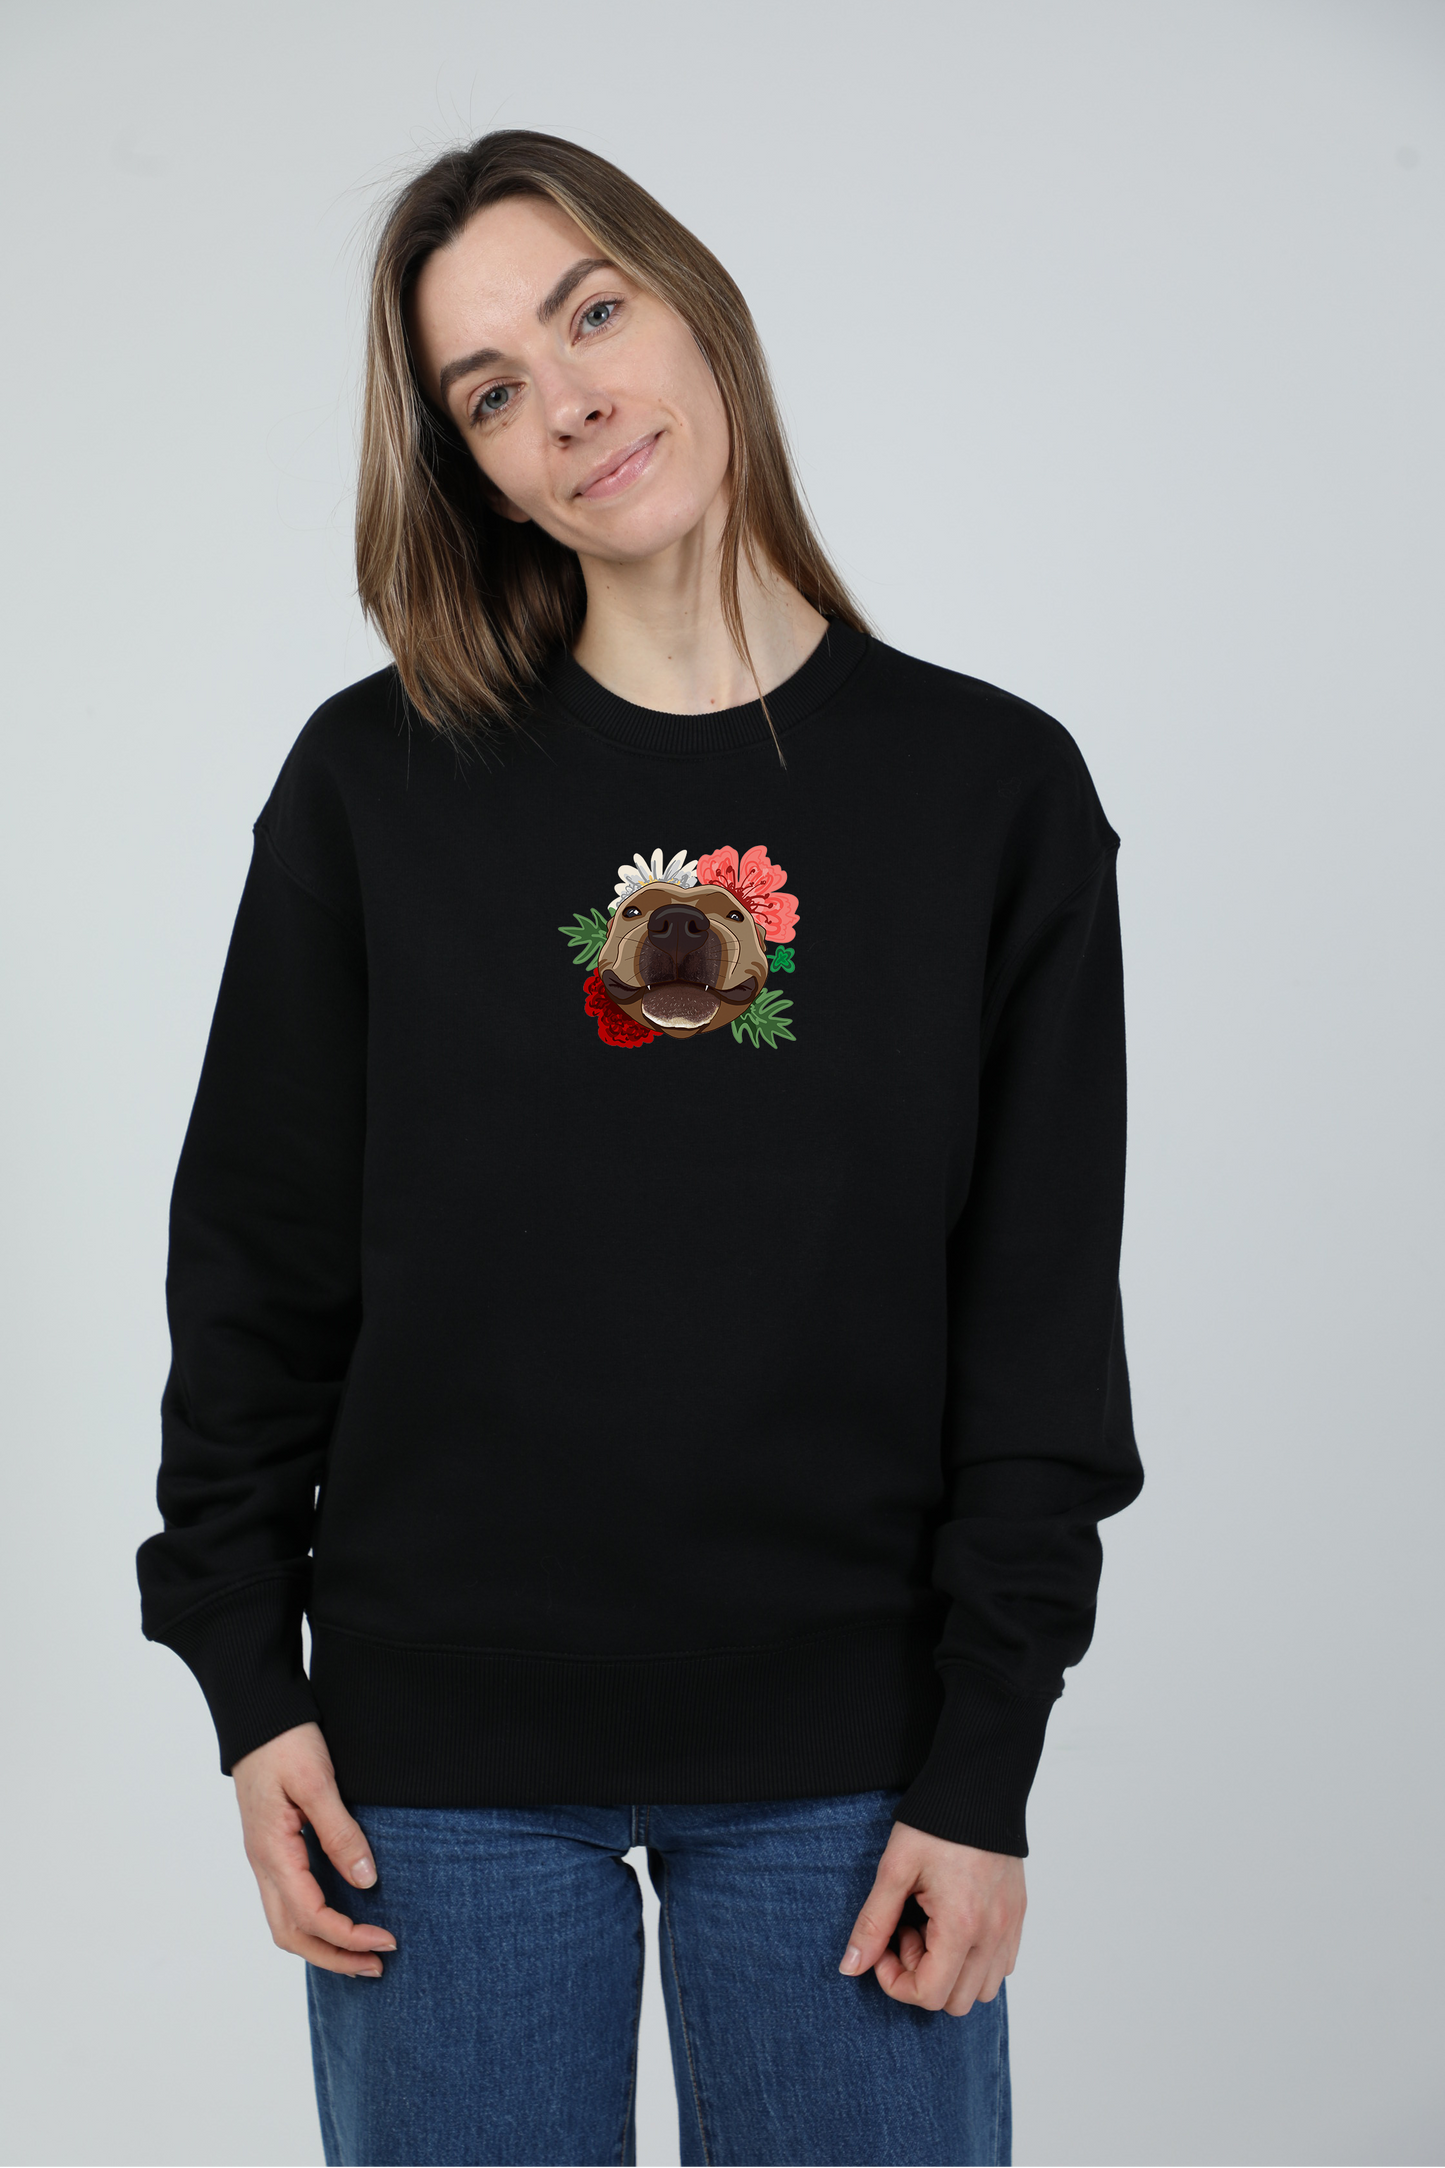 Serious dog with flowers | Crew neck sweatshirt with dog. Oversize fit | Unisex